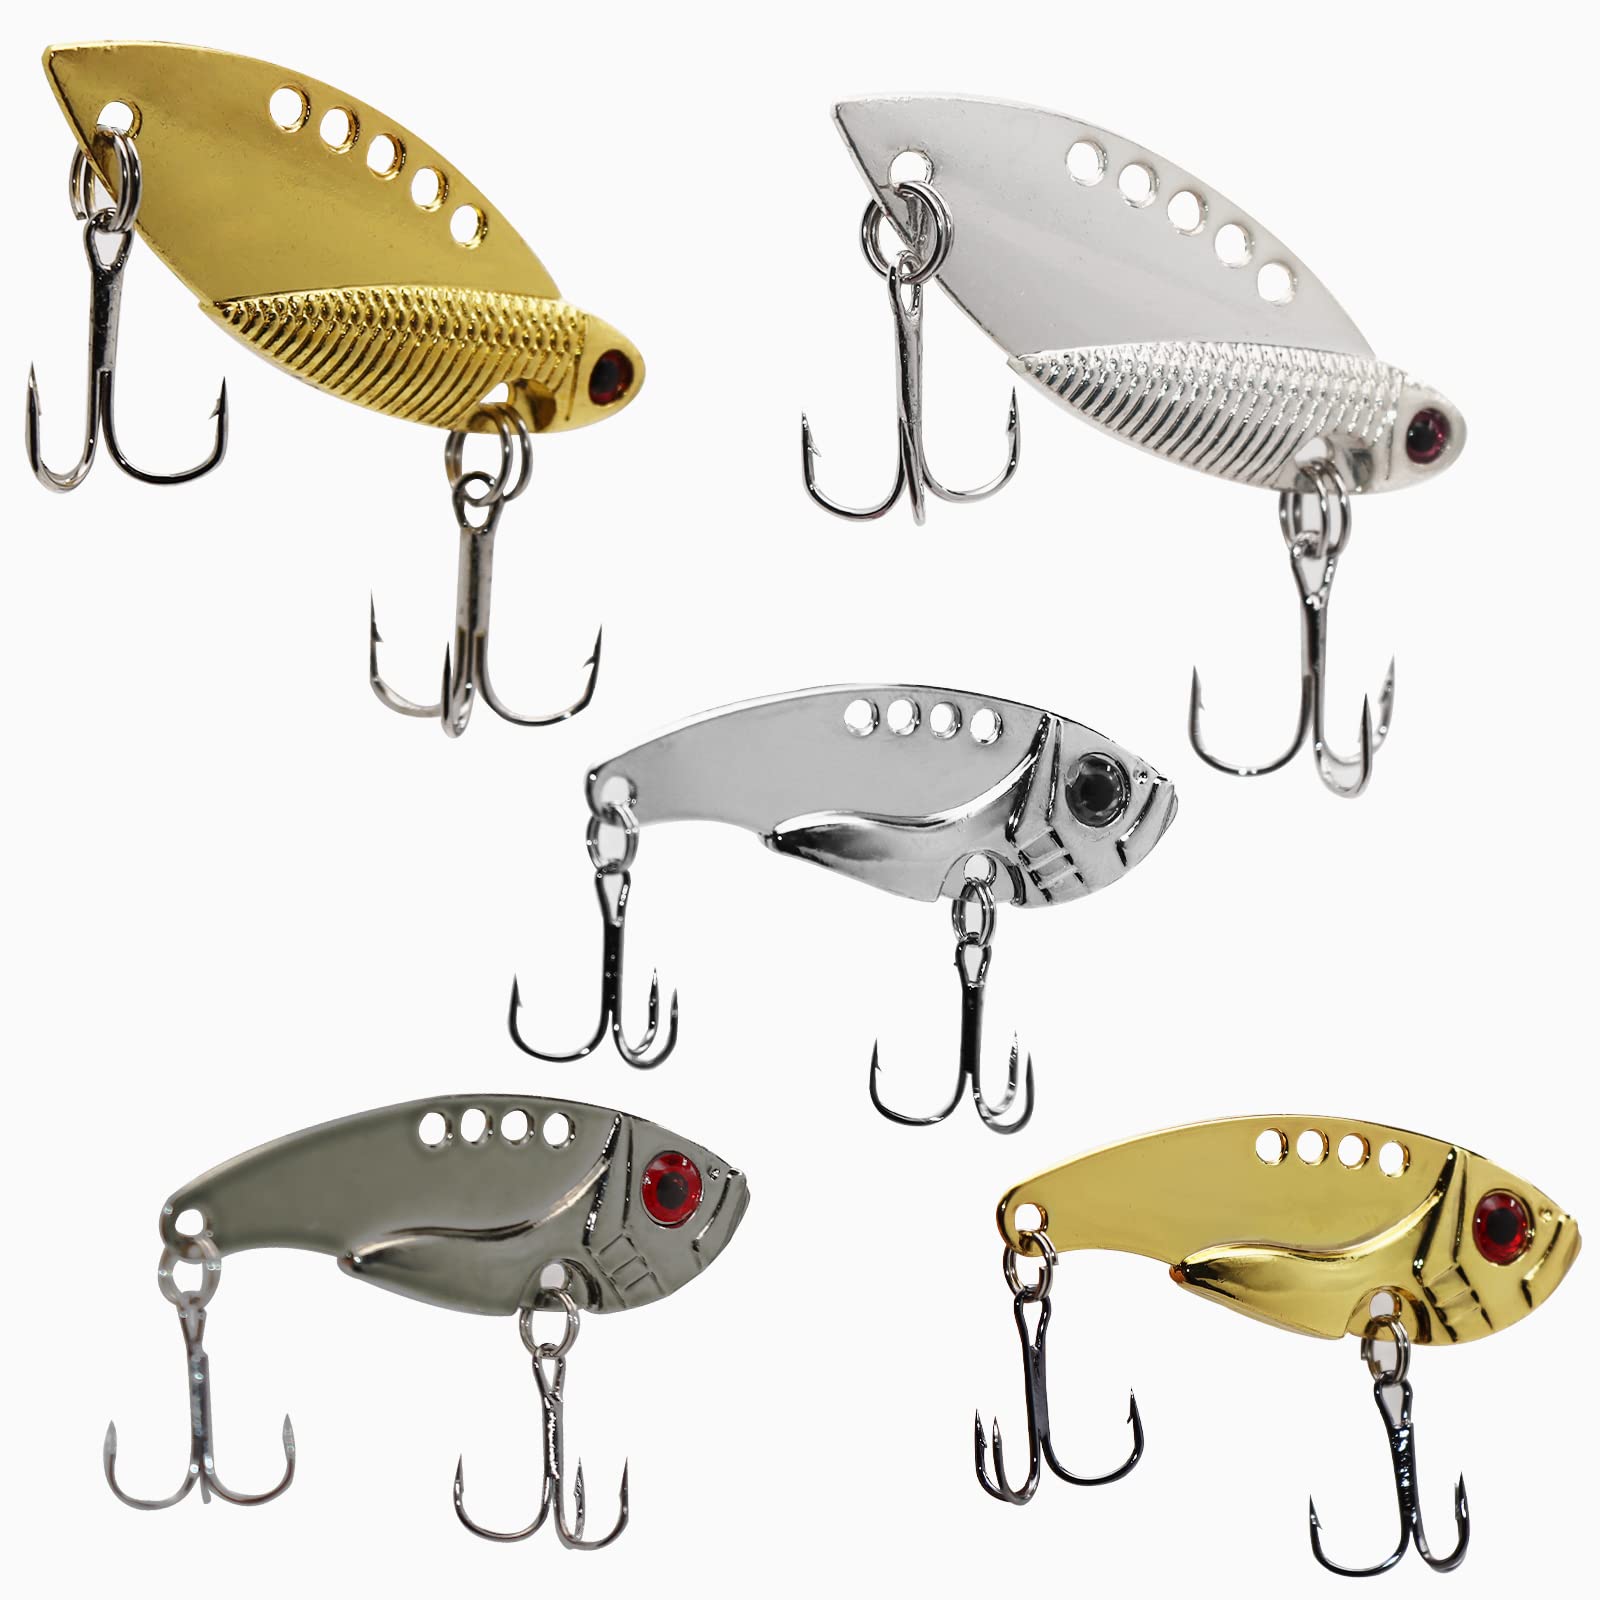  Qushy Blade Bait Fishing Lures for Freshwater Saltwater  Fishing Spoons Metal Hard Lure Vibrating Baits for Walleye Bass  Trout,5PCS/Box : Sports & Outdoors